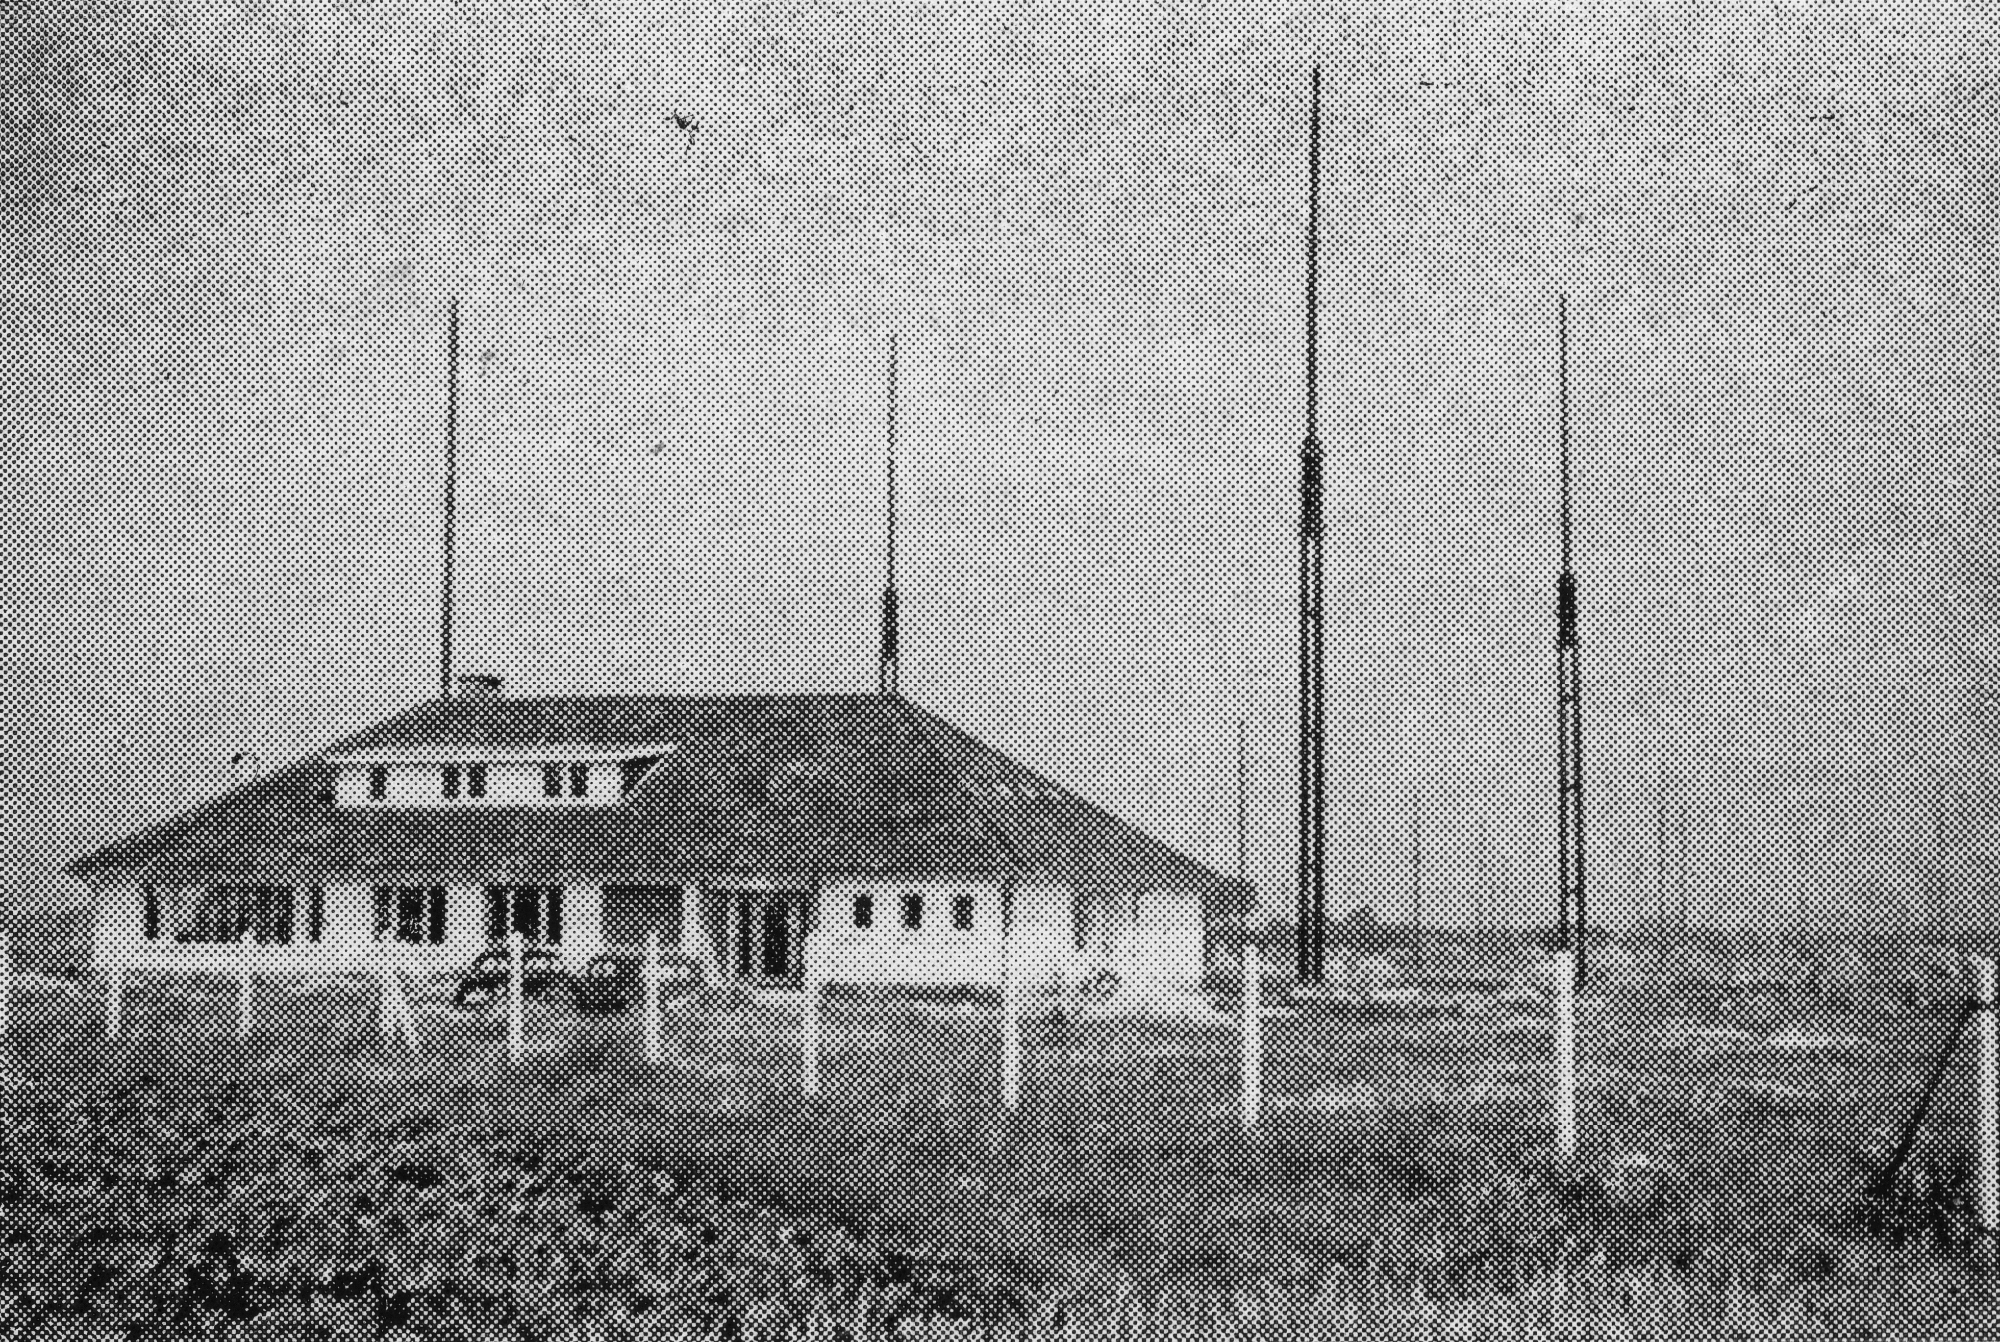 A house-like building in a rural area surrounded by 4 tall masts